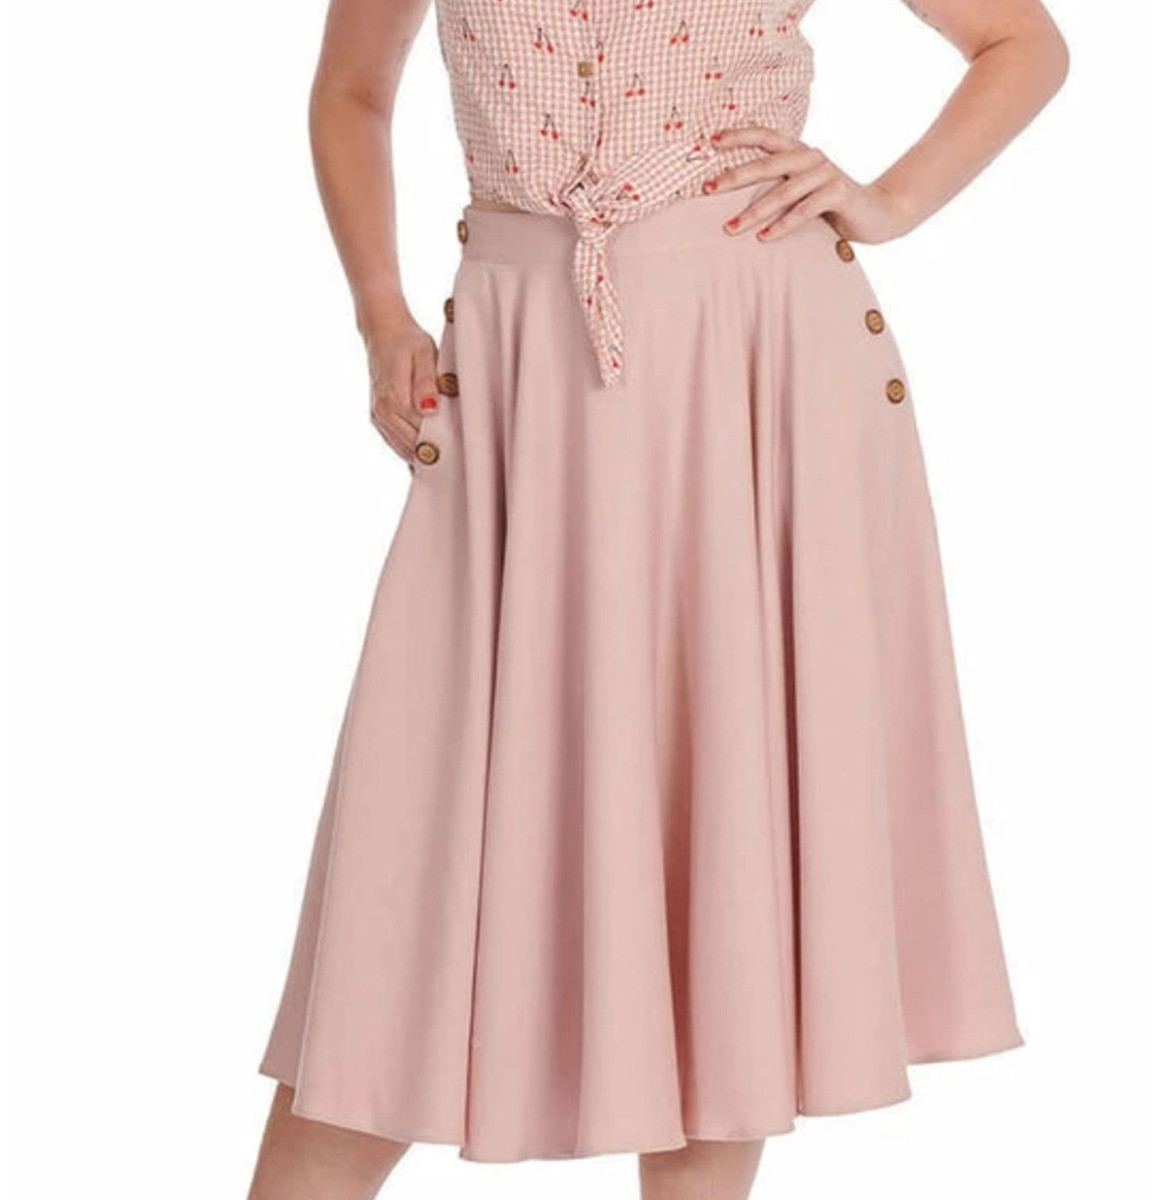 Banned Polly May Swing Skirt Pink -M